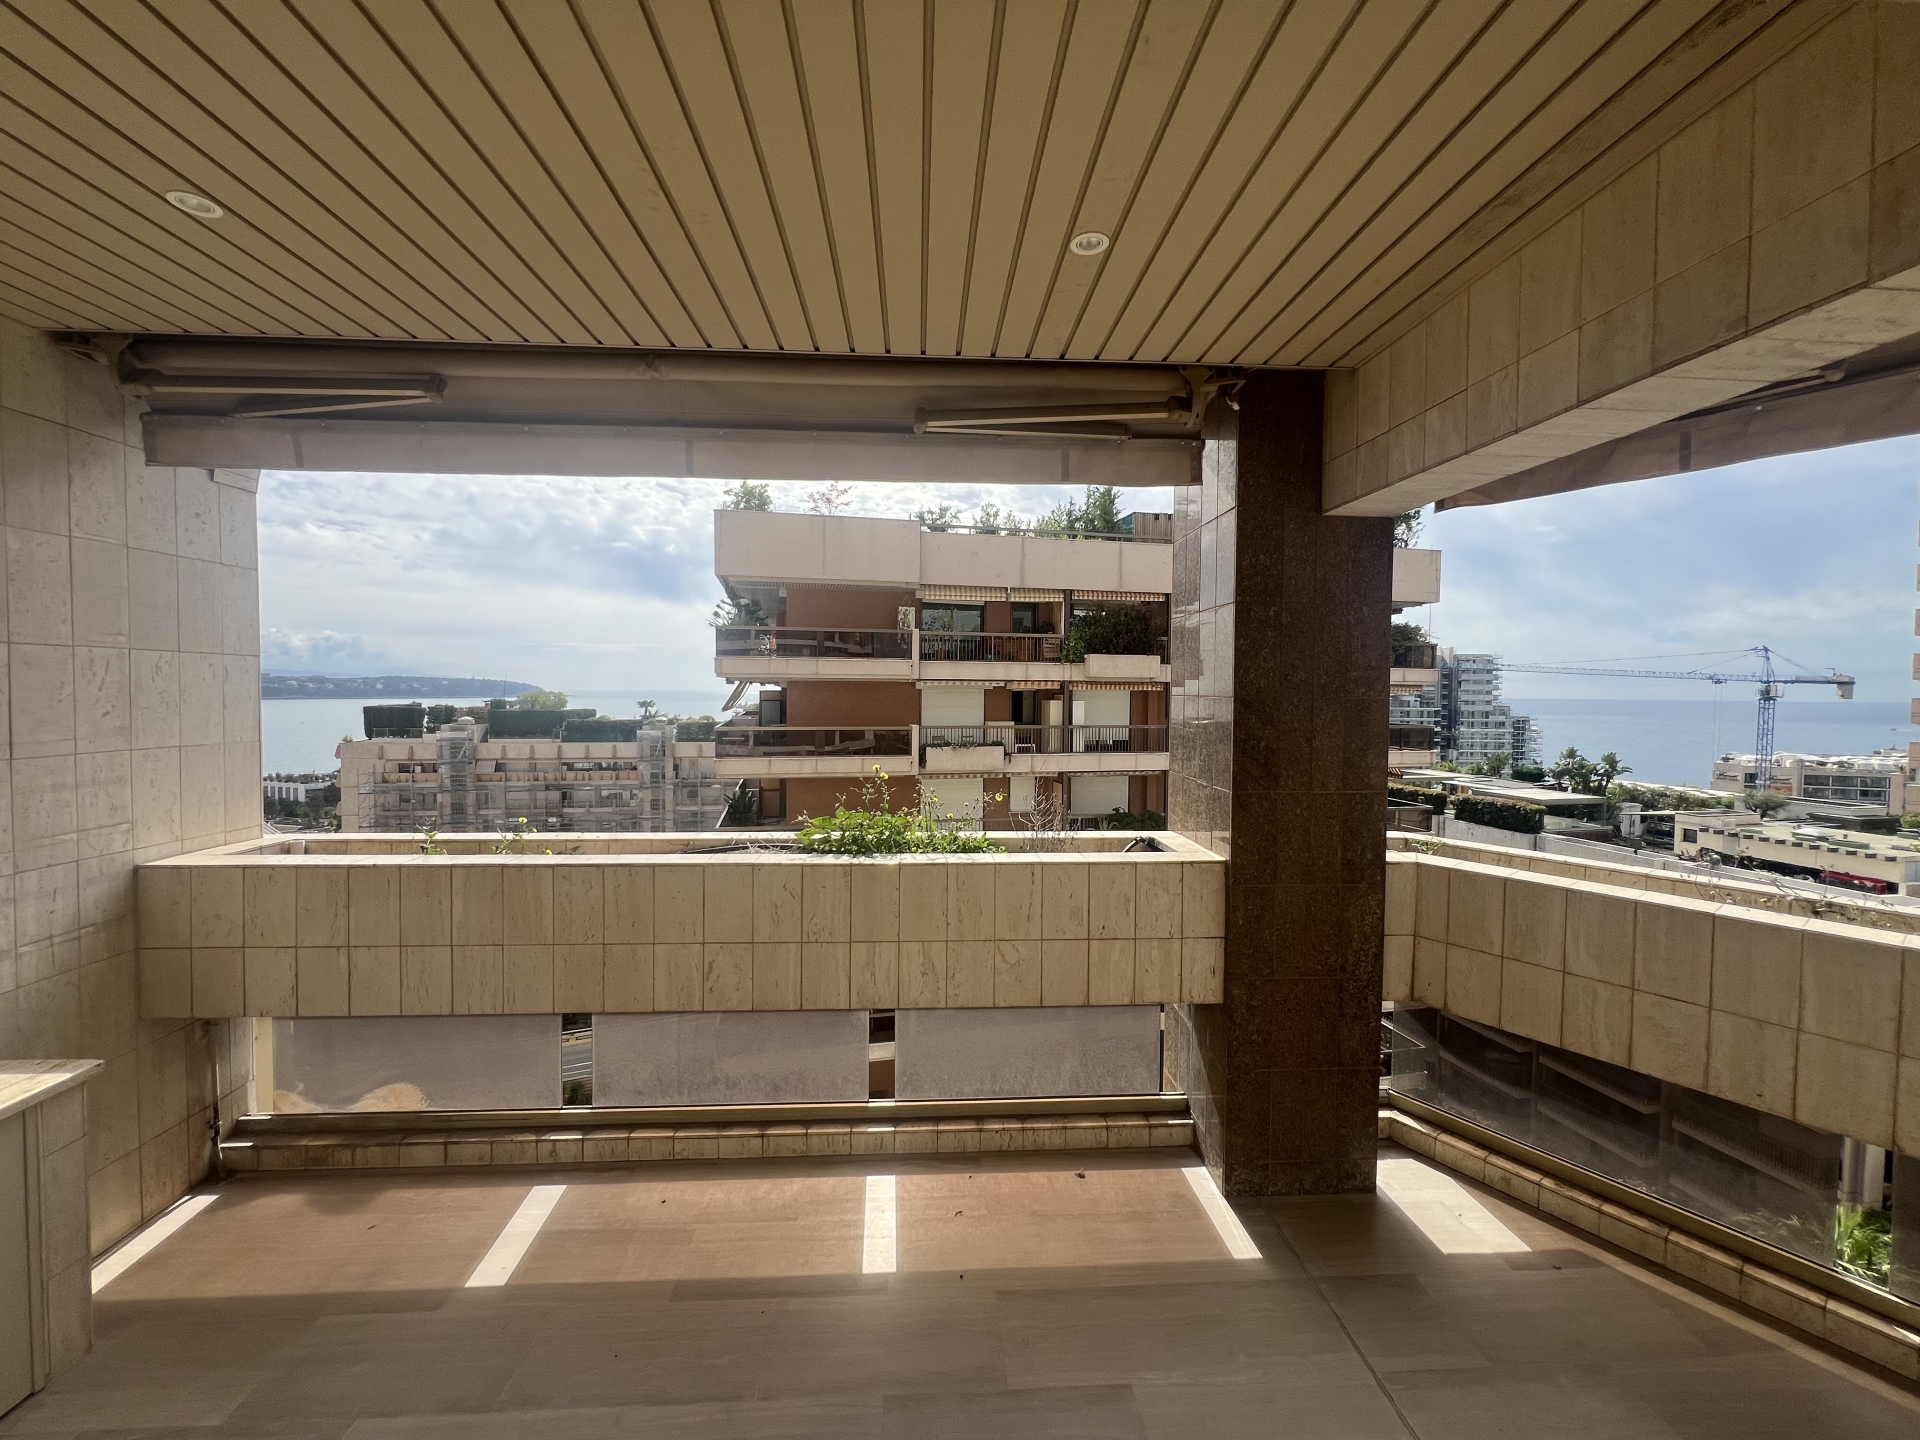 Dotta 5 rooms apartment for rent - GEORGE V - Monte-Carlo - Monaco - imgimage00003